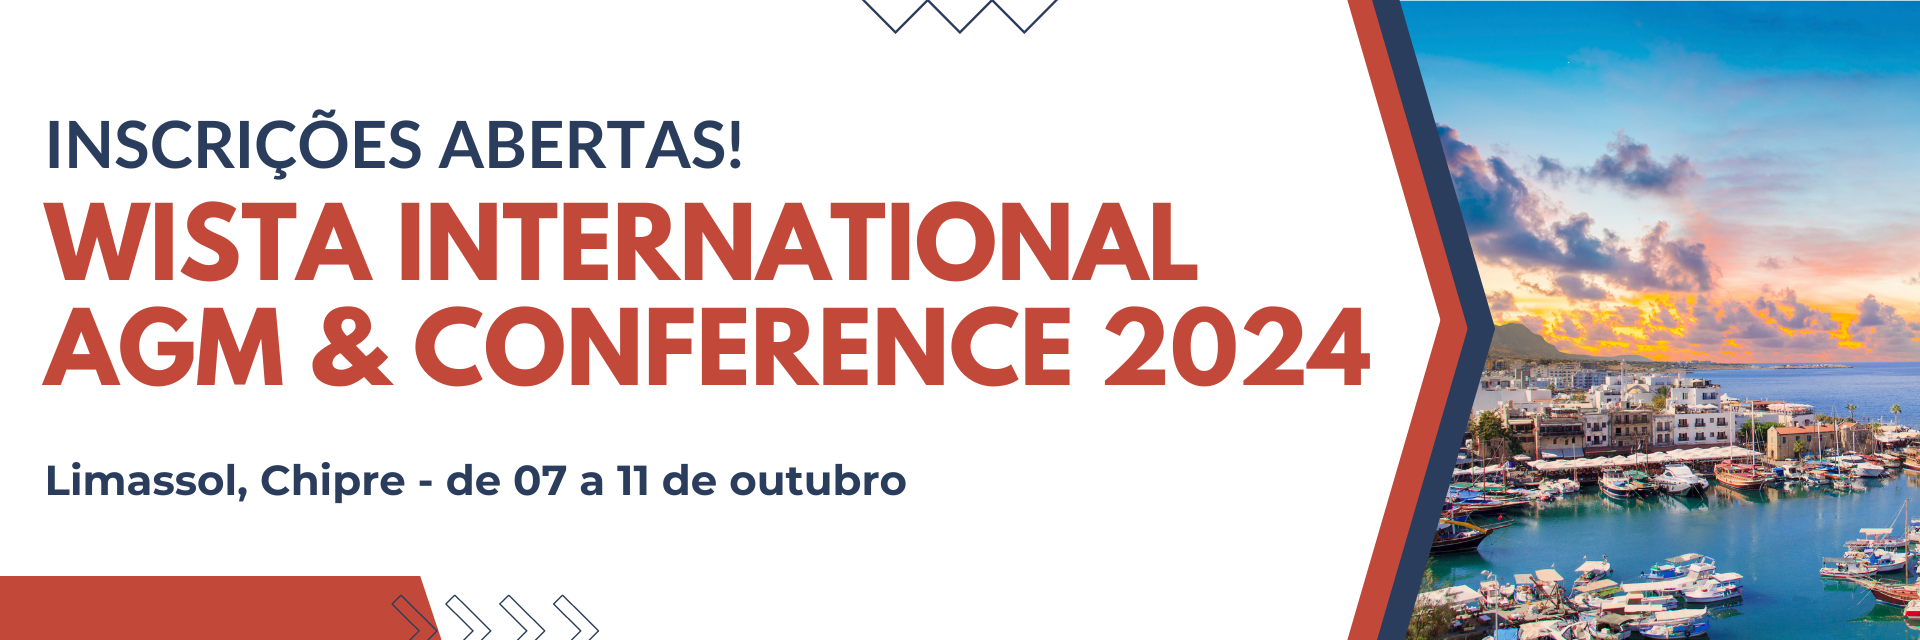 WISTA INTERNATIONAL AGM & CONFERENCE 2024